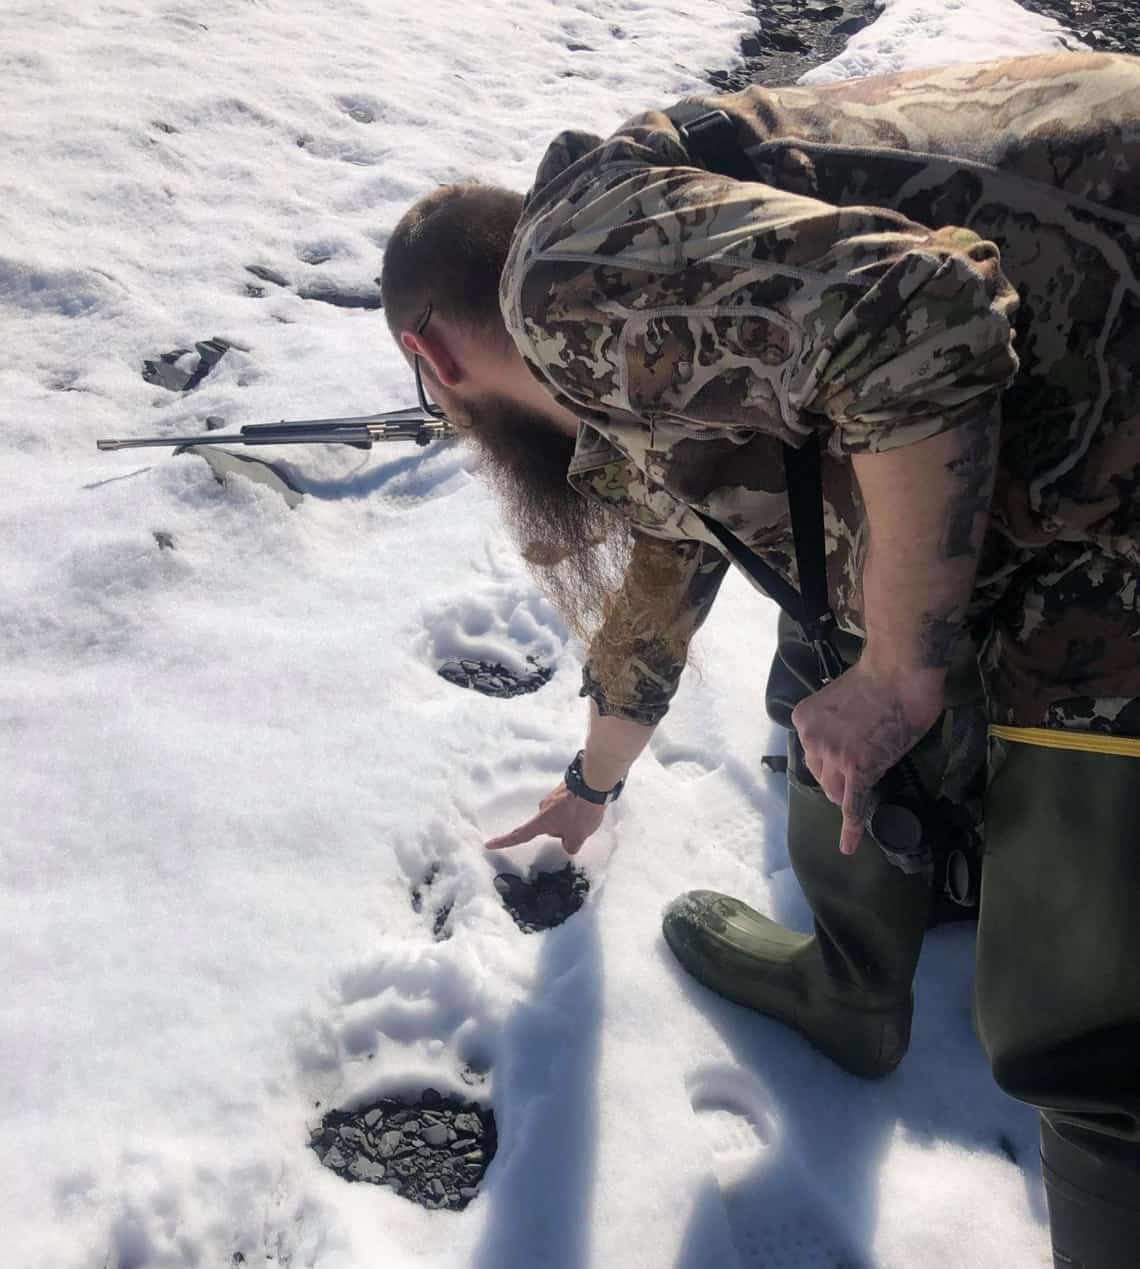 In the early spring, you will be looking for bears coming out of their dens. Often they will emerge, do some exploring and return again to the den, leaving tracks in the snow. Finding those tracks is fairly easy if you have good glass, but then it’s a long hike in the snowshoes and you hope the bear is still there.